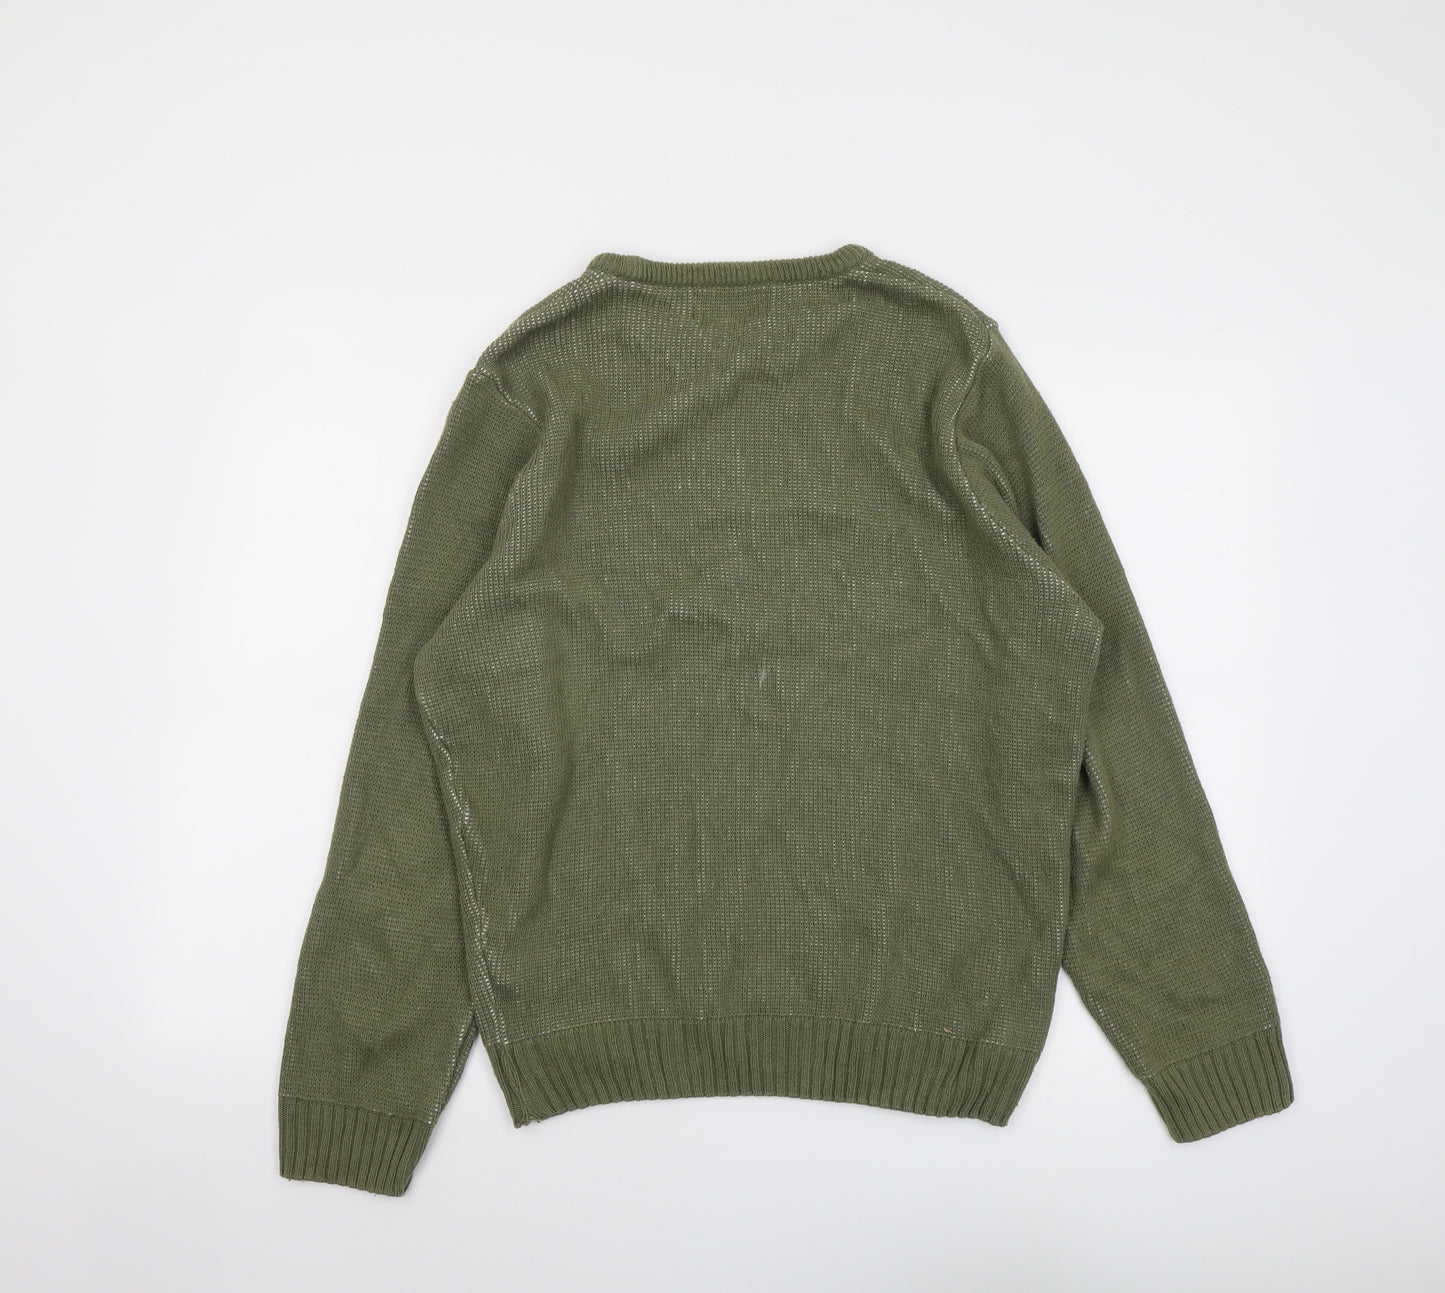 The British Jumper Company Mens Green Round Neck Cotton Pullover Jumper Size M Long Sleeve